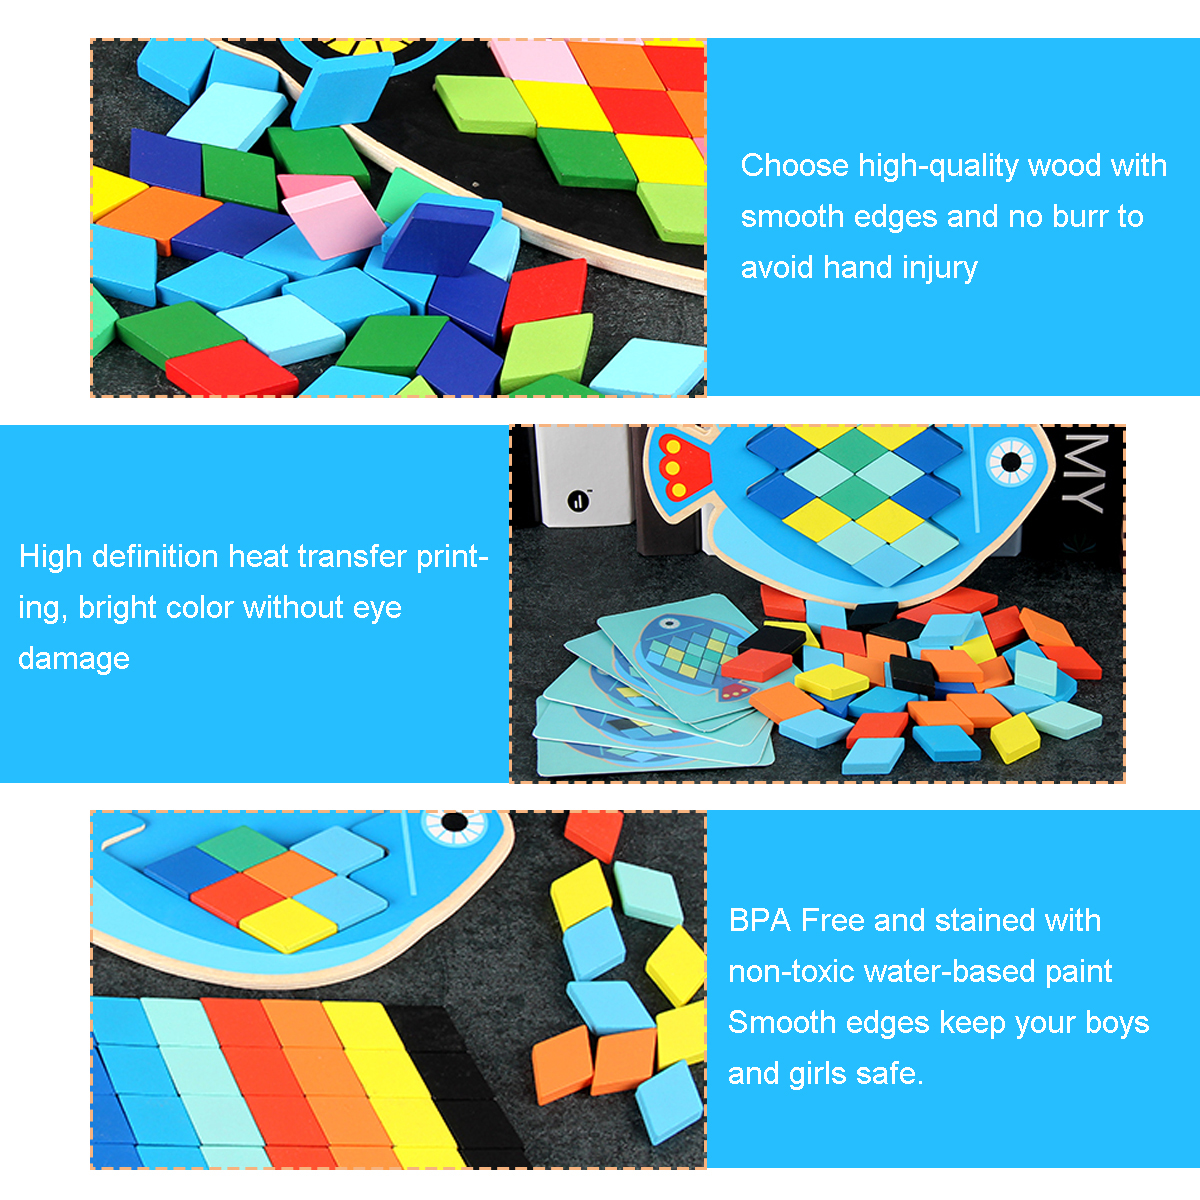 Wood-DIY-Assembly-Jigsaw-Puzzle-Toy-Colors-Shapes-Cartoon-Fish-Owl-Matching-Cards-Toy-for-Children-L-1682195-8